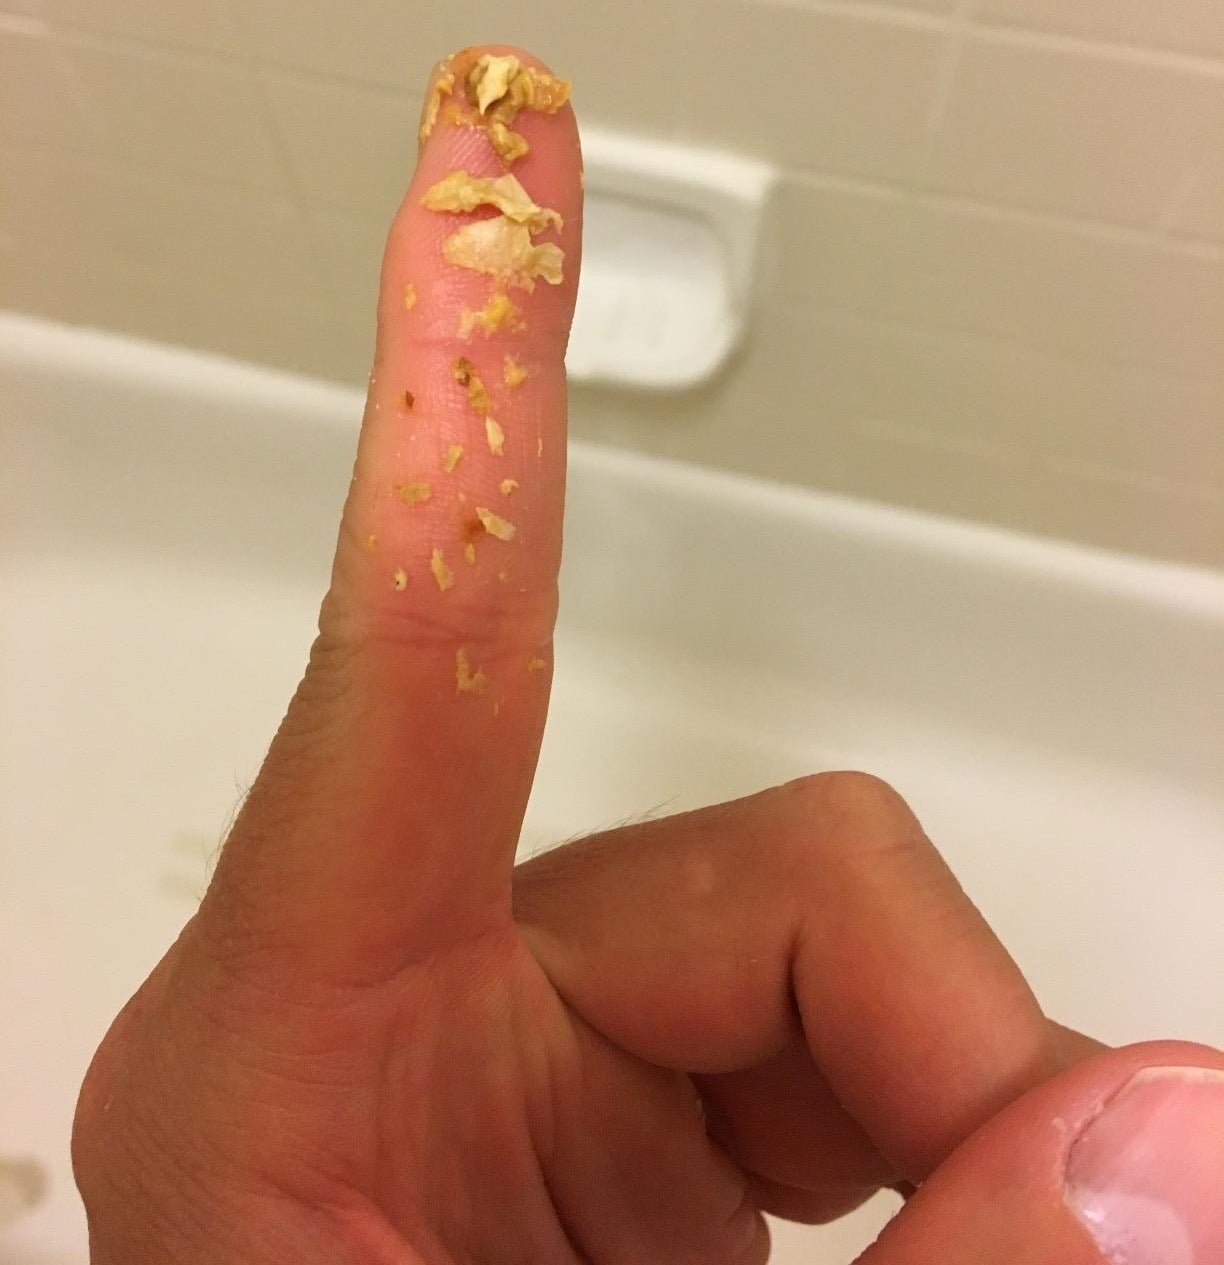 Reviewer photo of their finger covered in chunks of ear wax